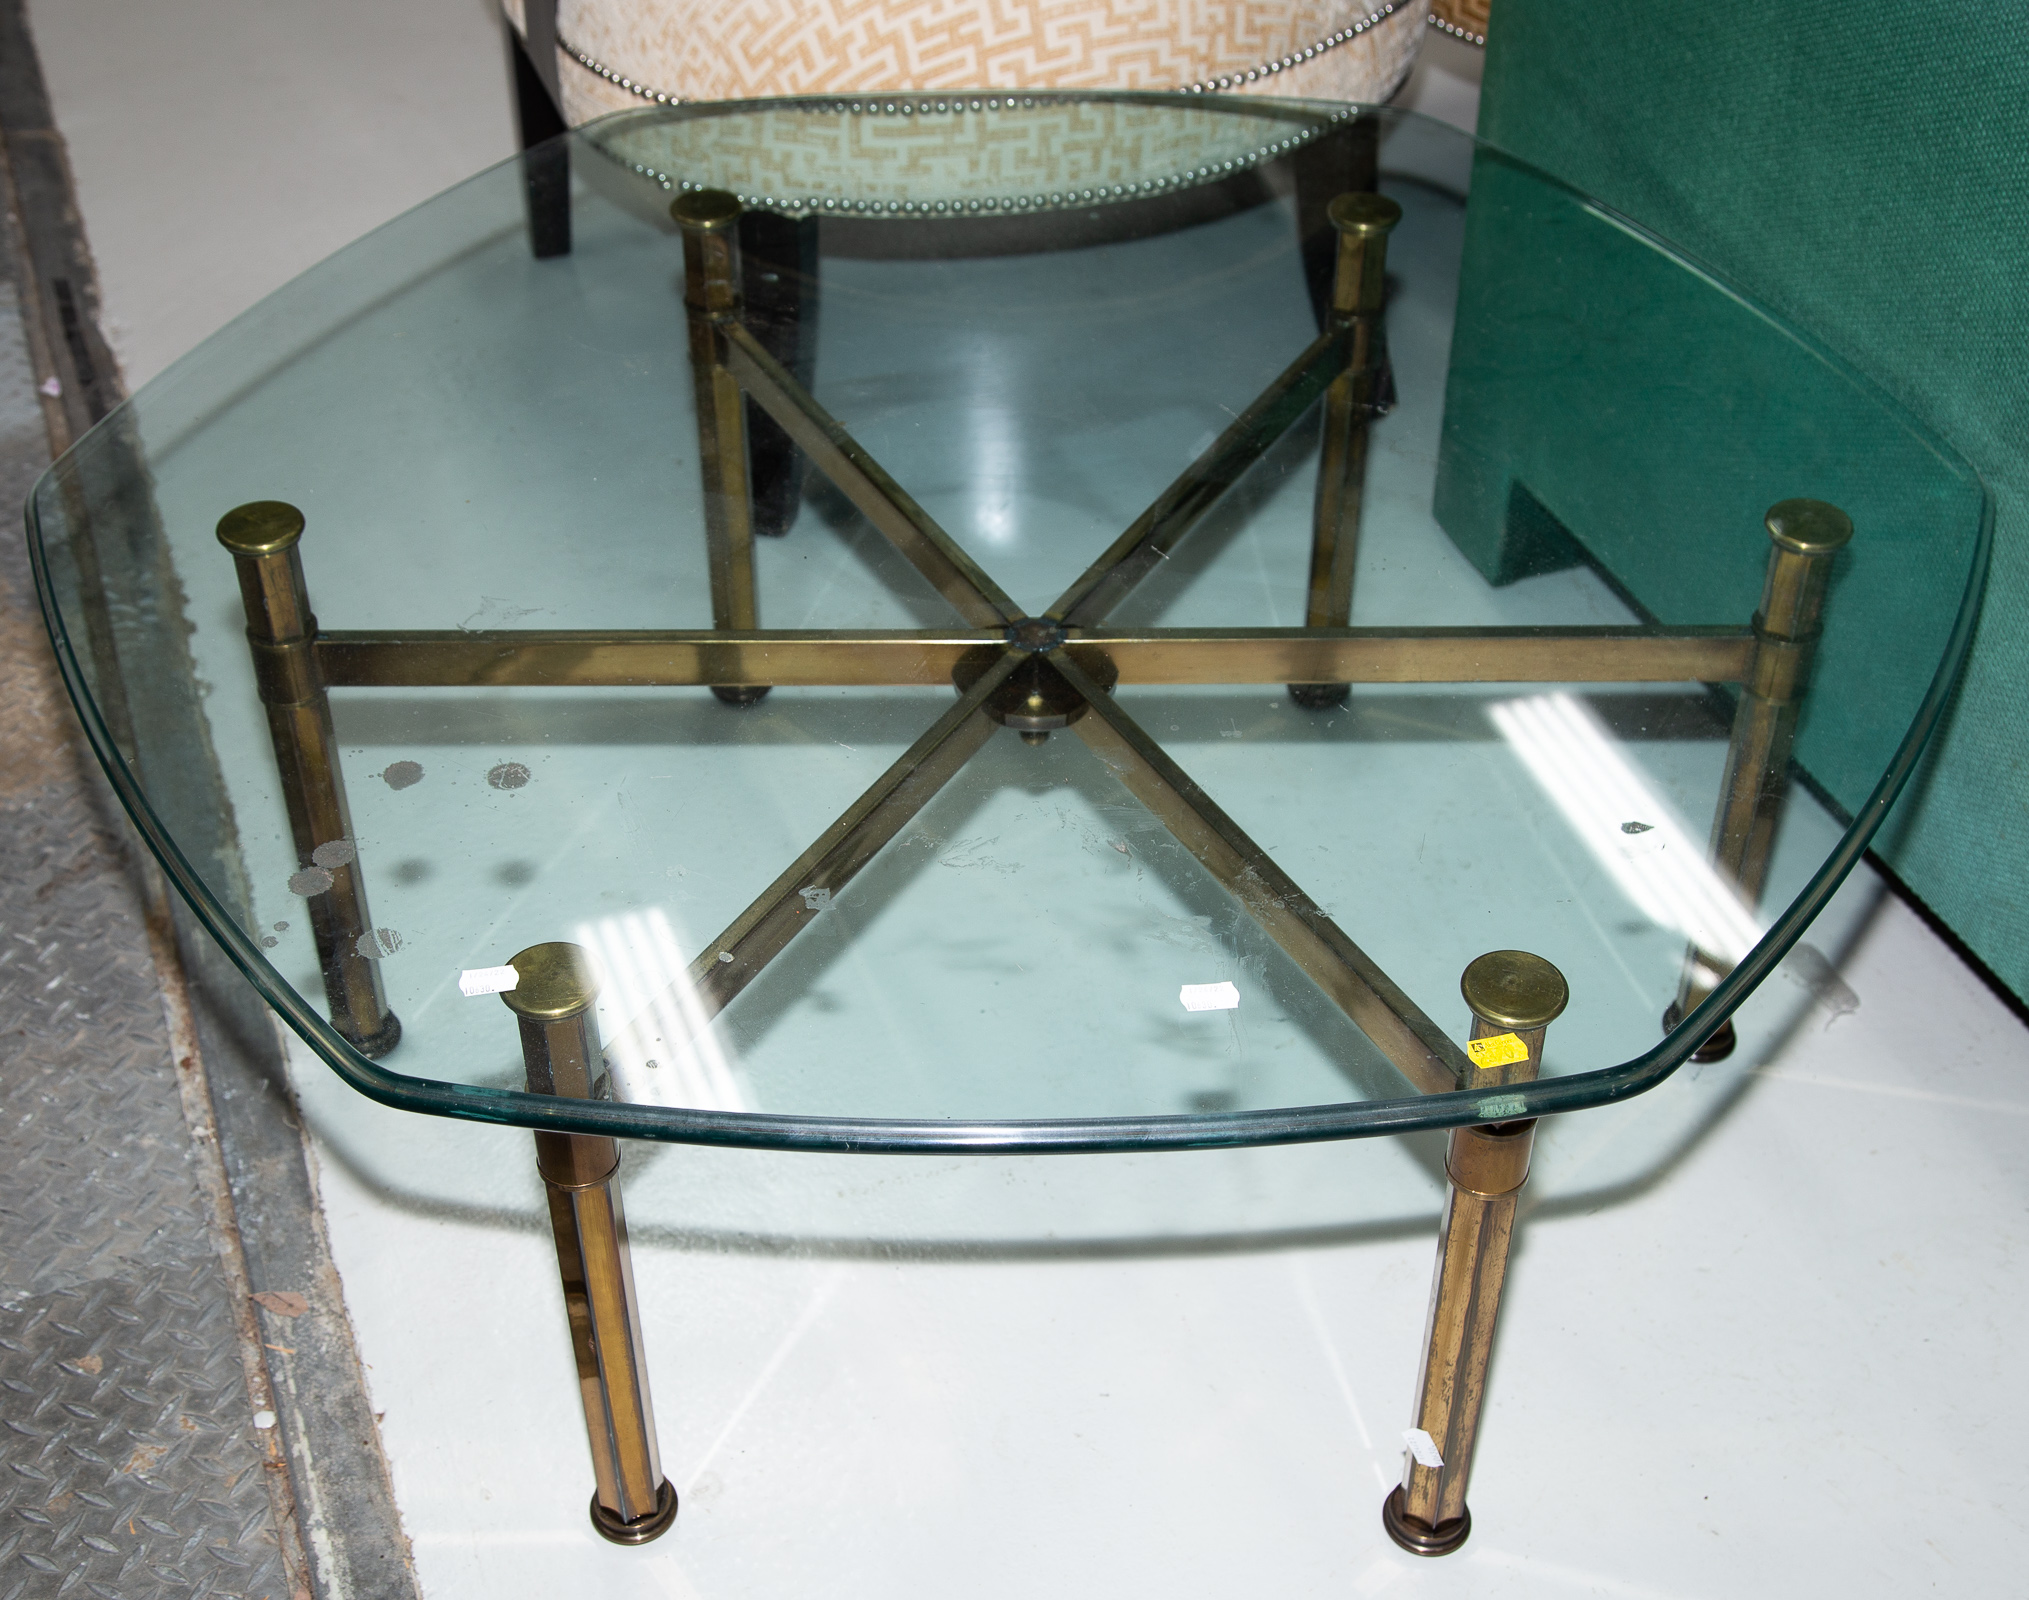 METAL BASED COFFEE TABLE WITH GLASS 337c40